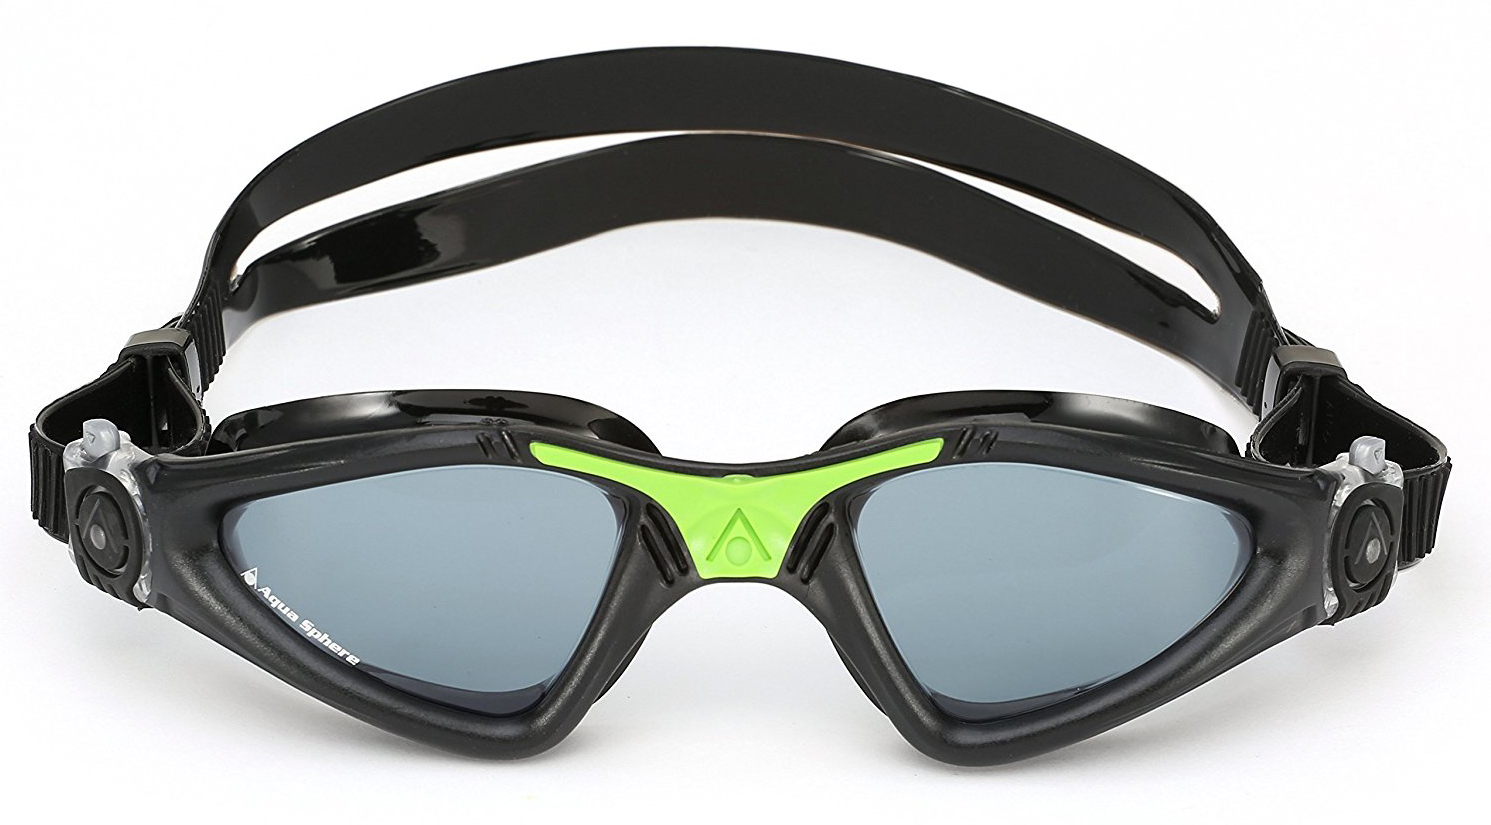 
The 10 Best Swimming Goggles in 2021
